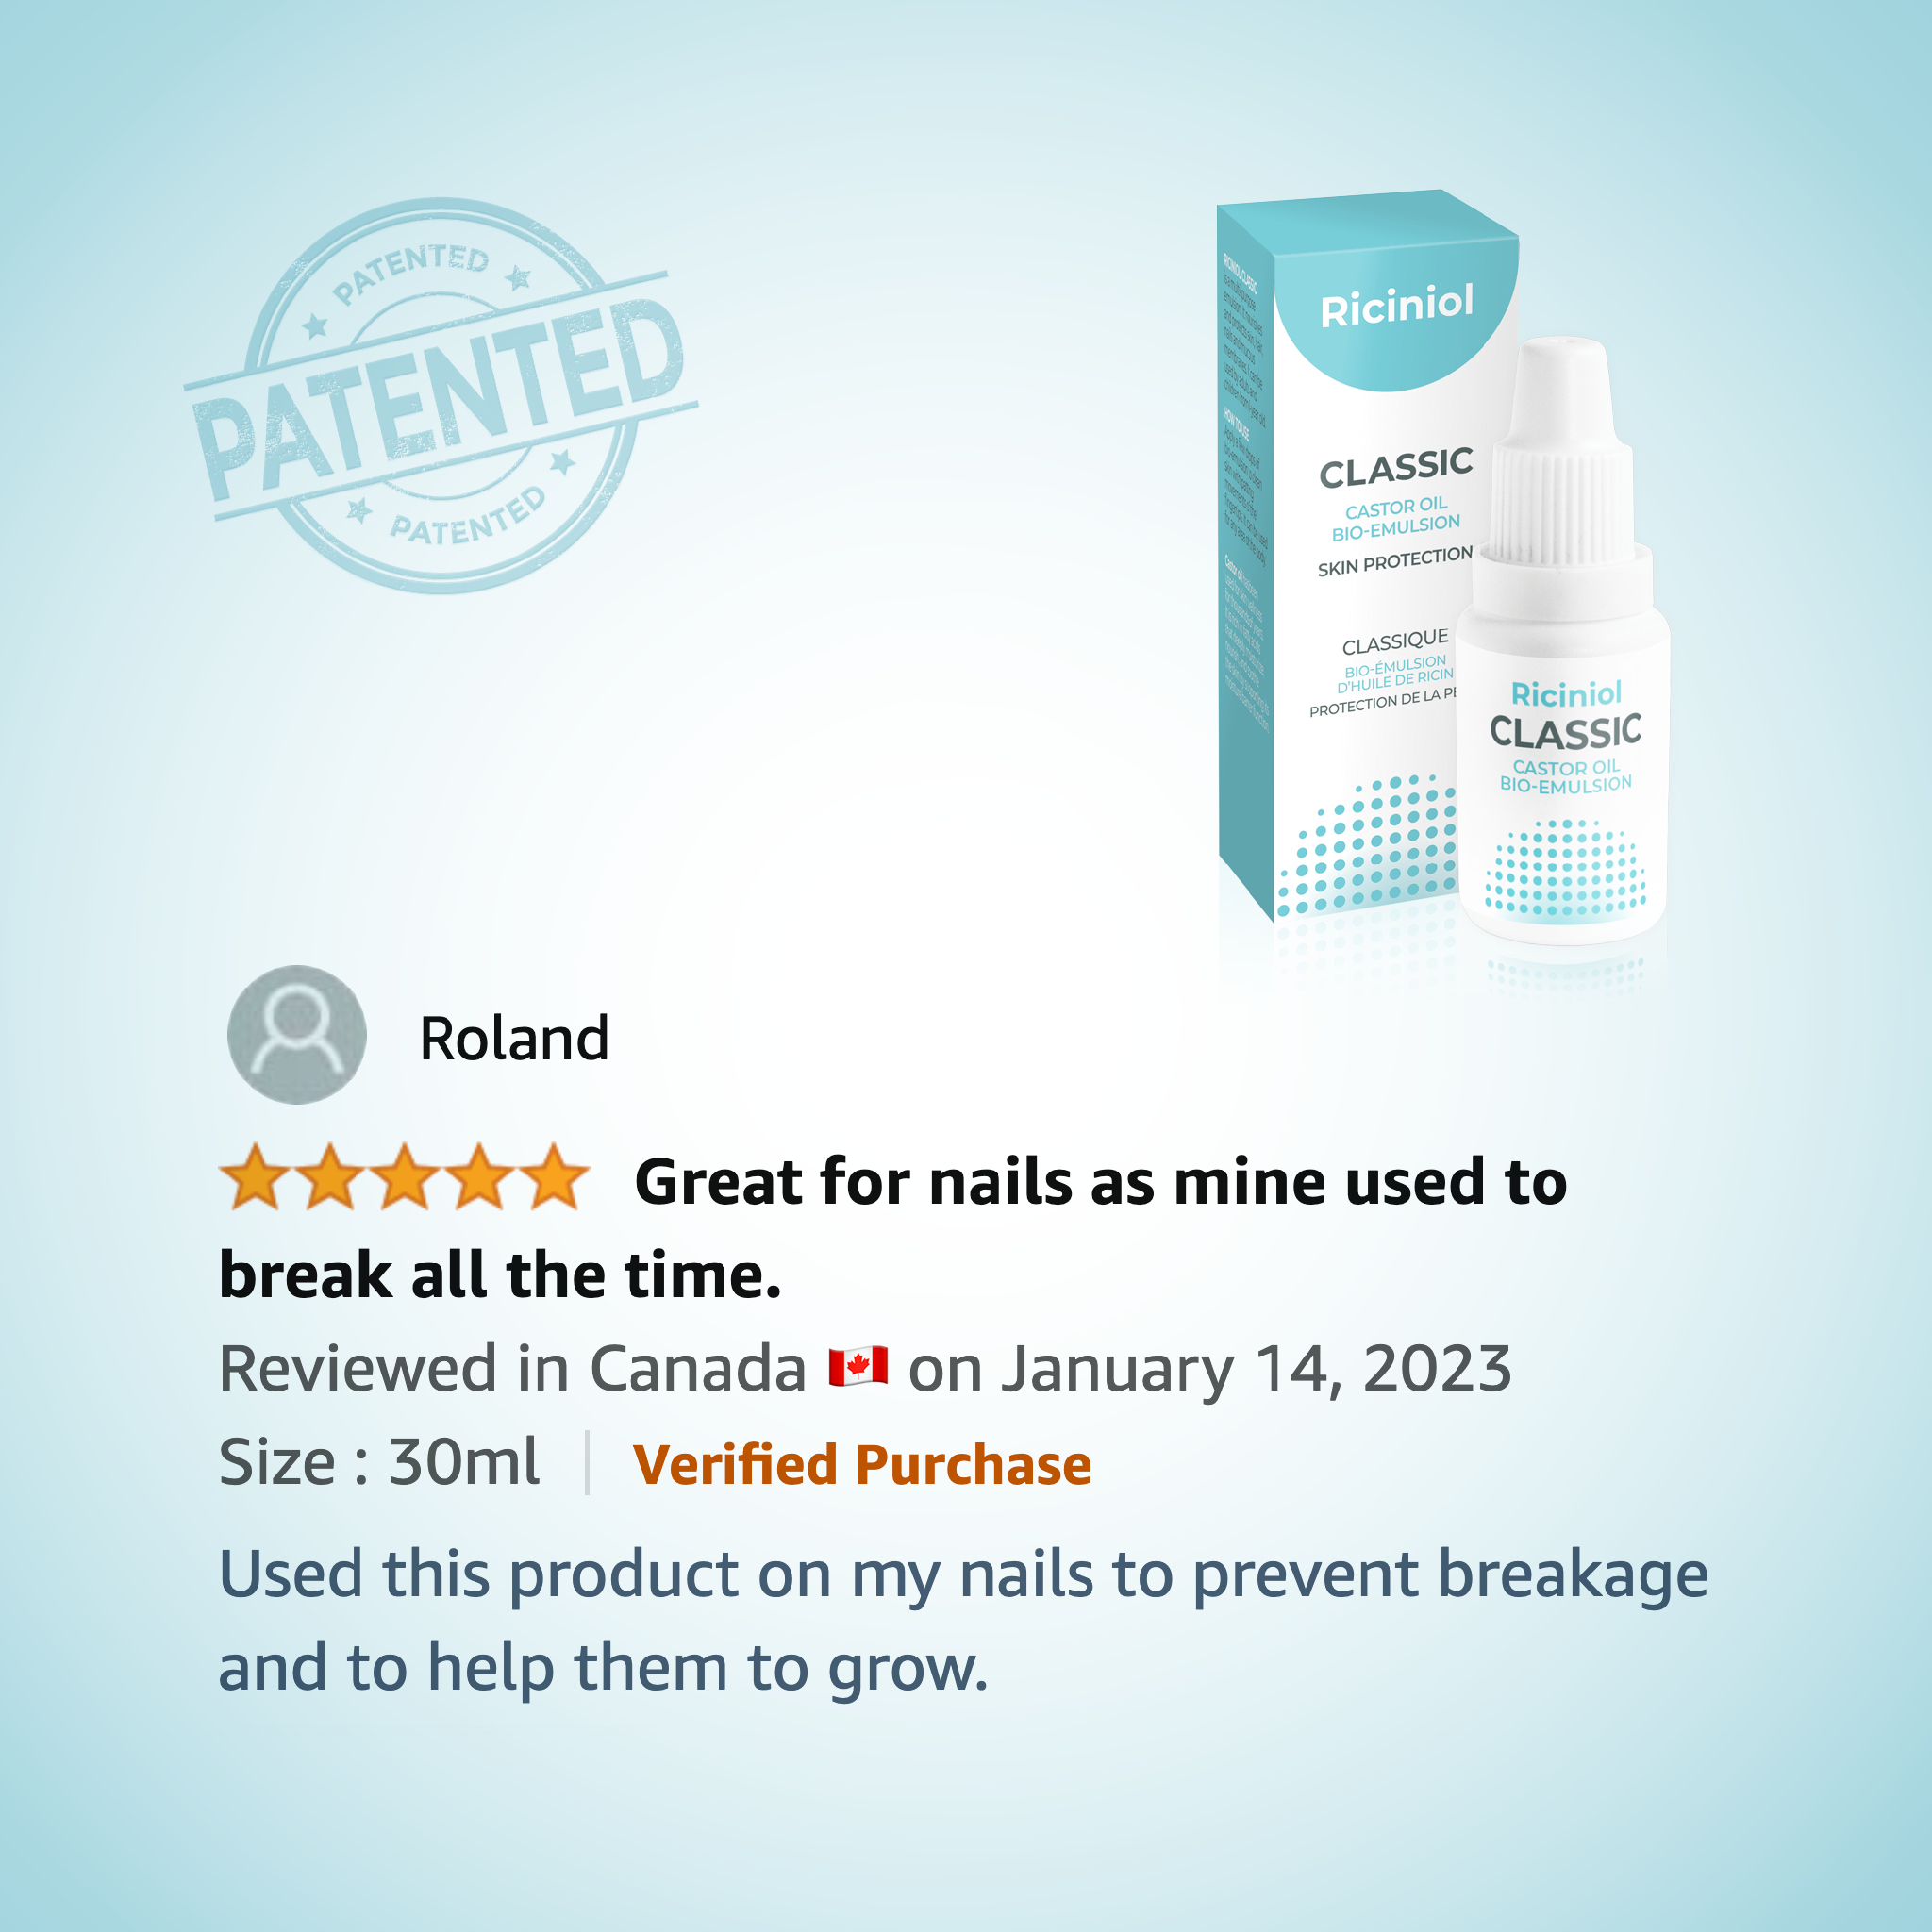 Riciniol Classic review great for nails